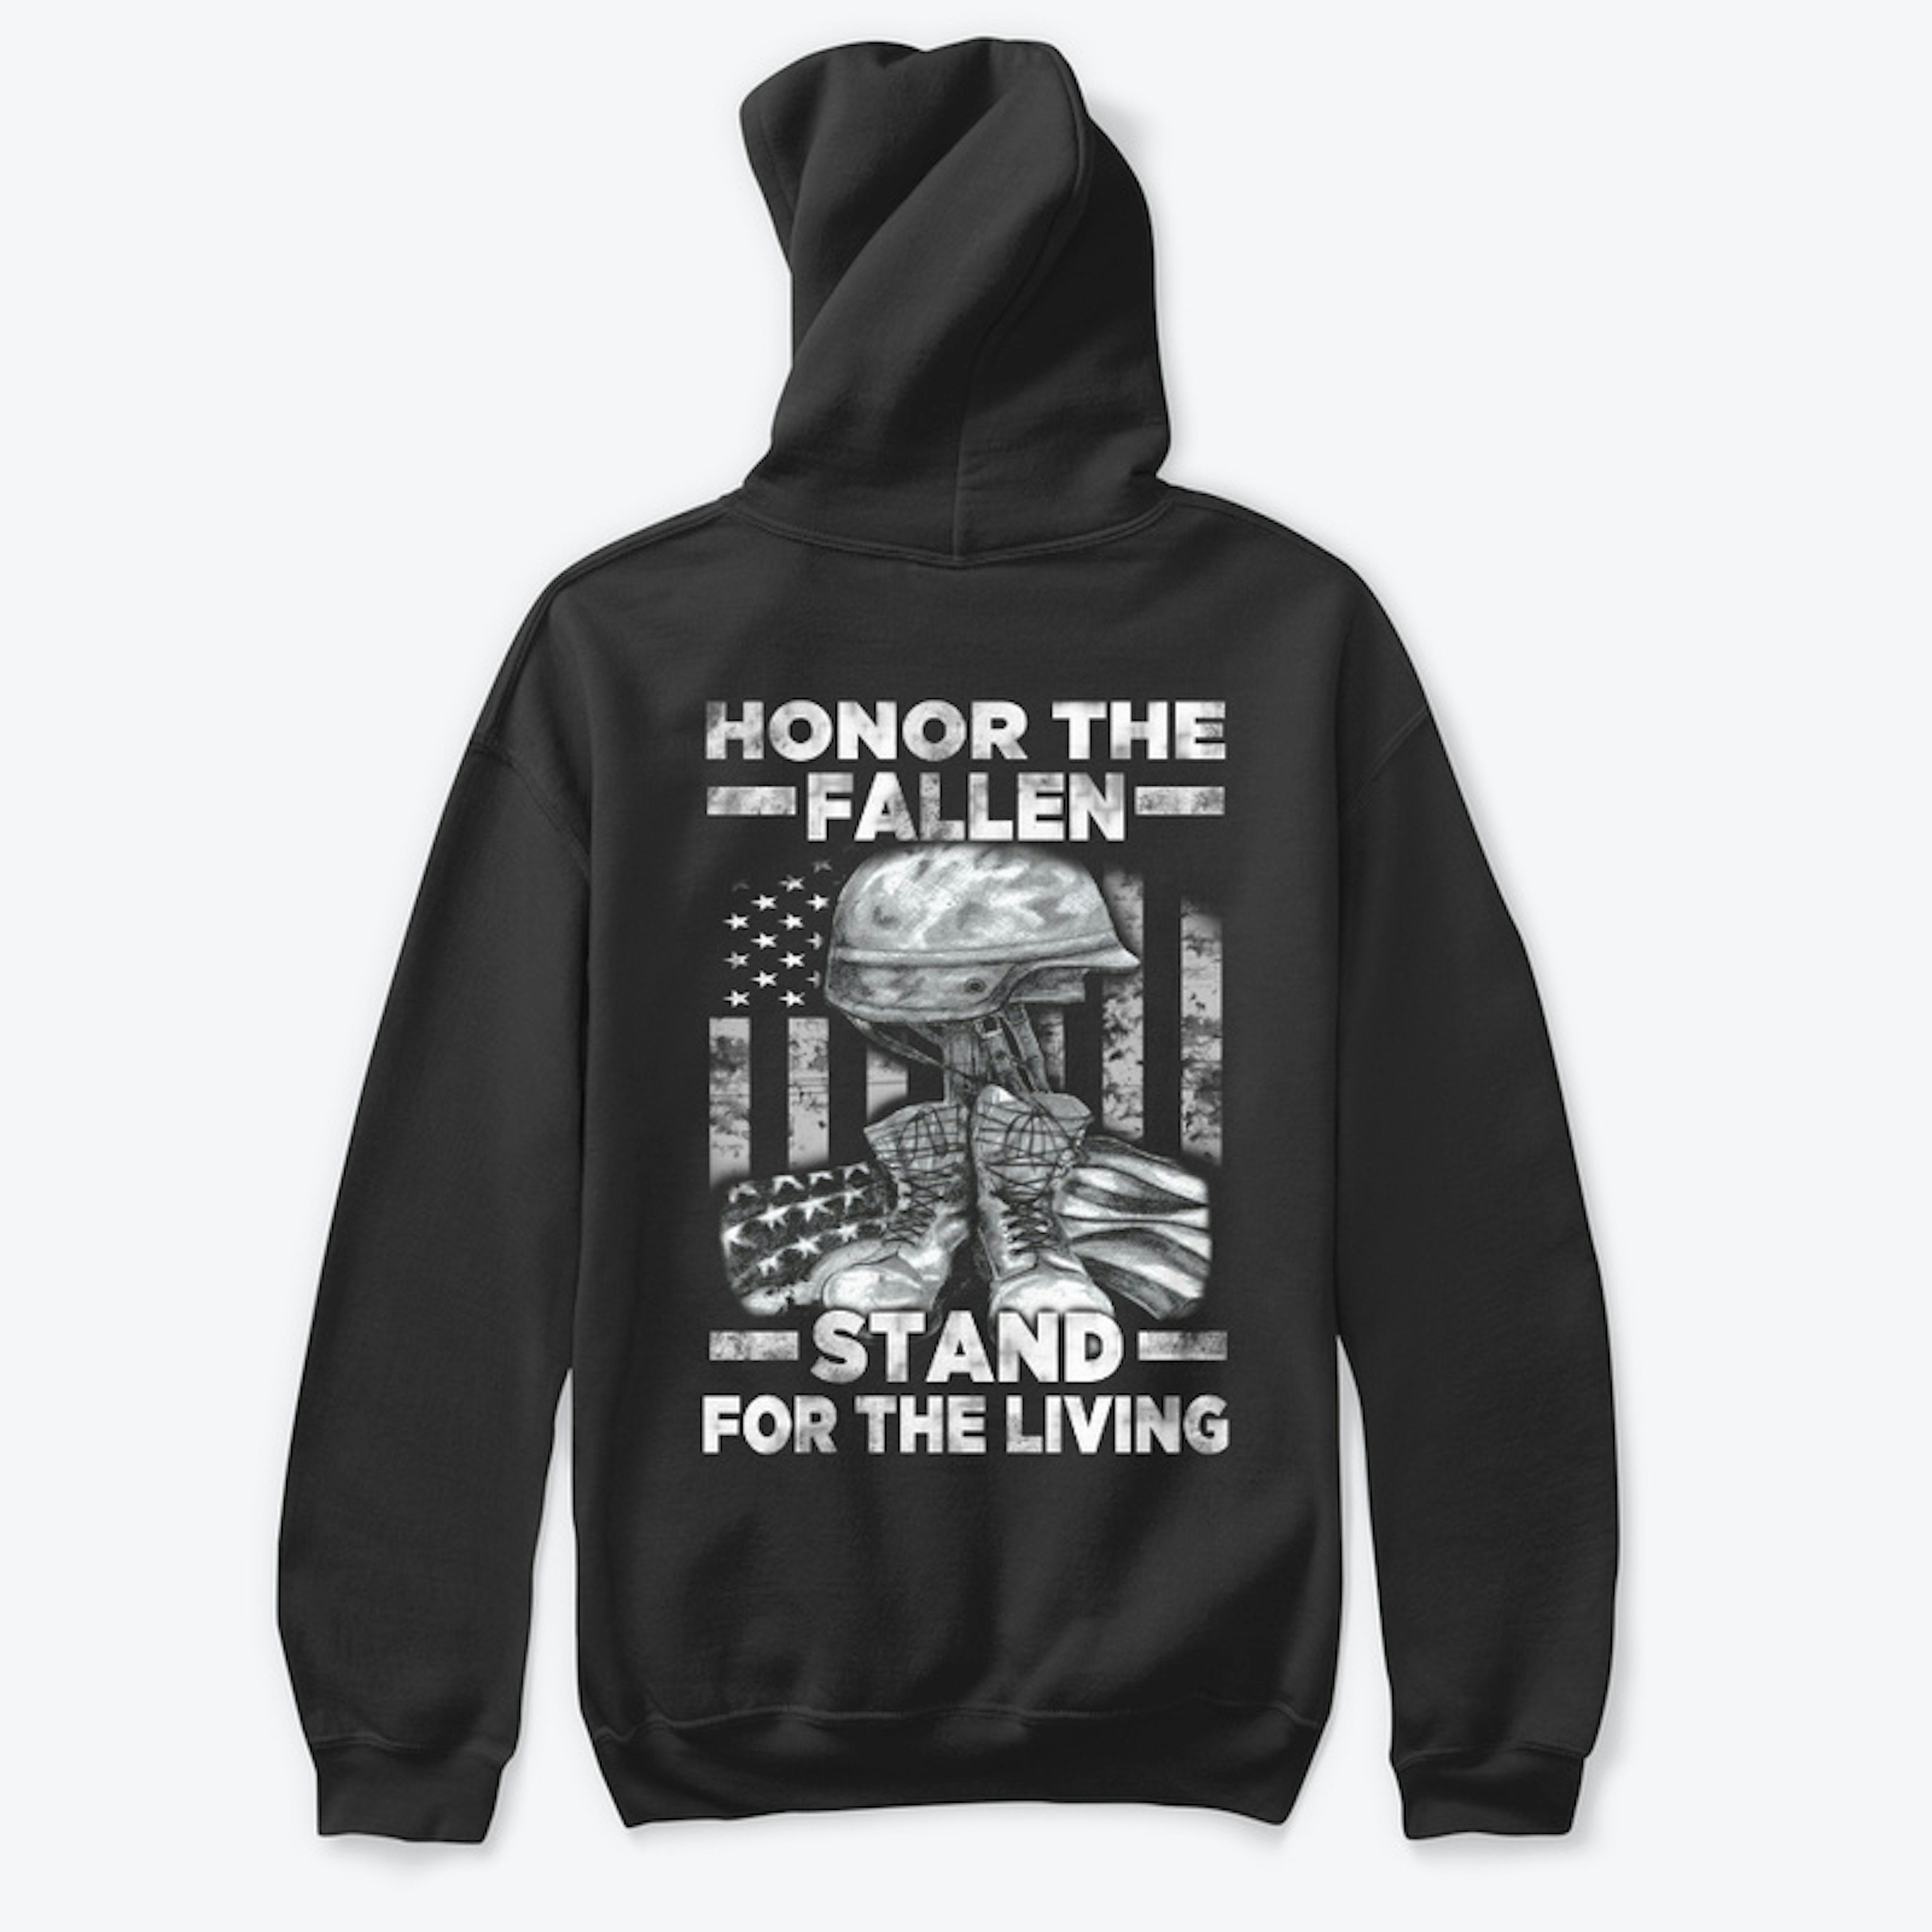 Honor The Fallen - Stand For The Living